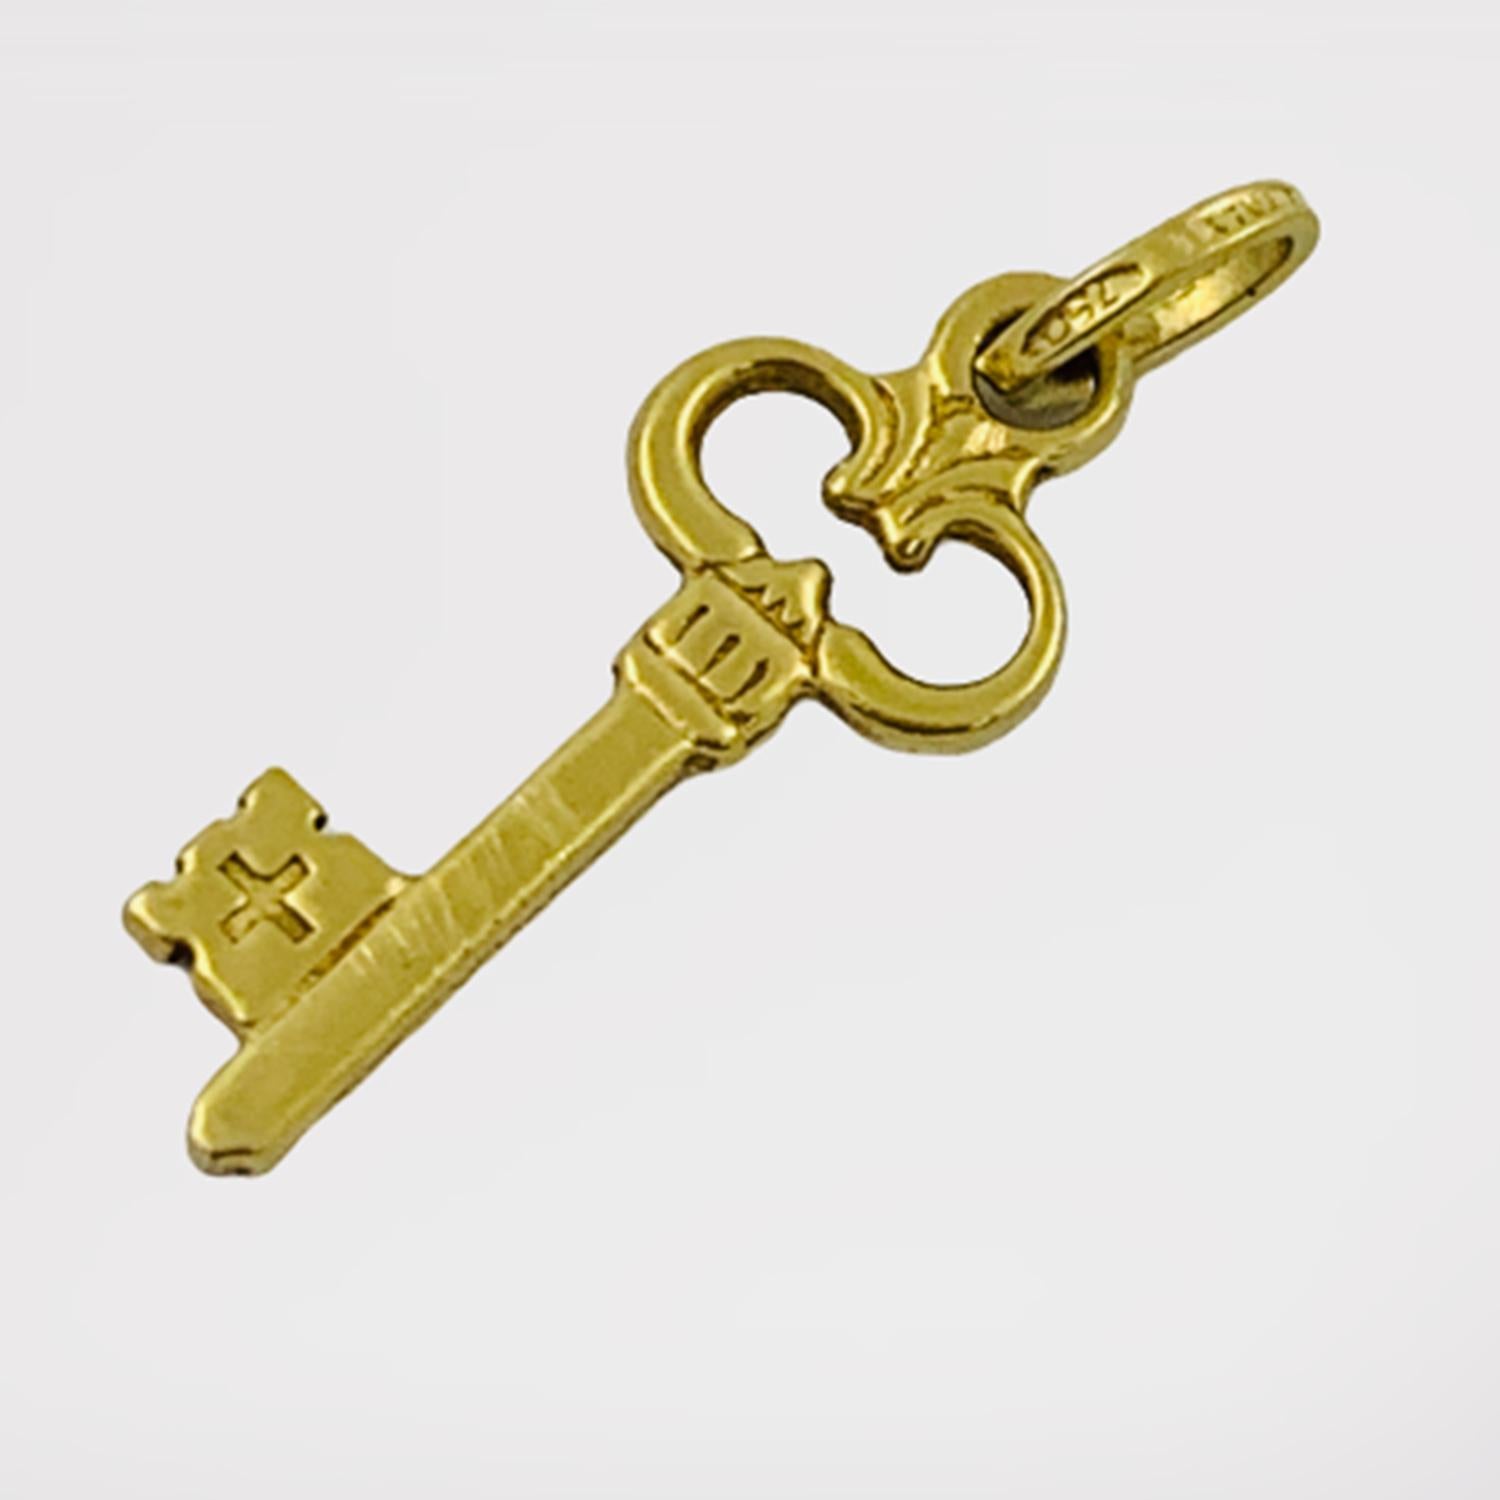 Vintage Golden Skeleton Key Charm Pendant Circa 1960s

Crafted of 18K yellow gold, this charming key is one of a kind. The key features beautiful engravings at the top and the bottom adding to the charm's character. It;s the perfect vintage piece to